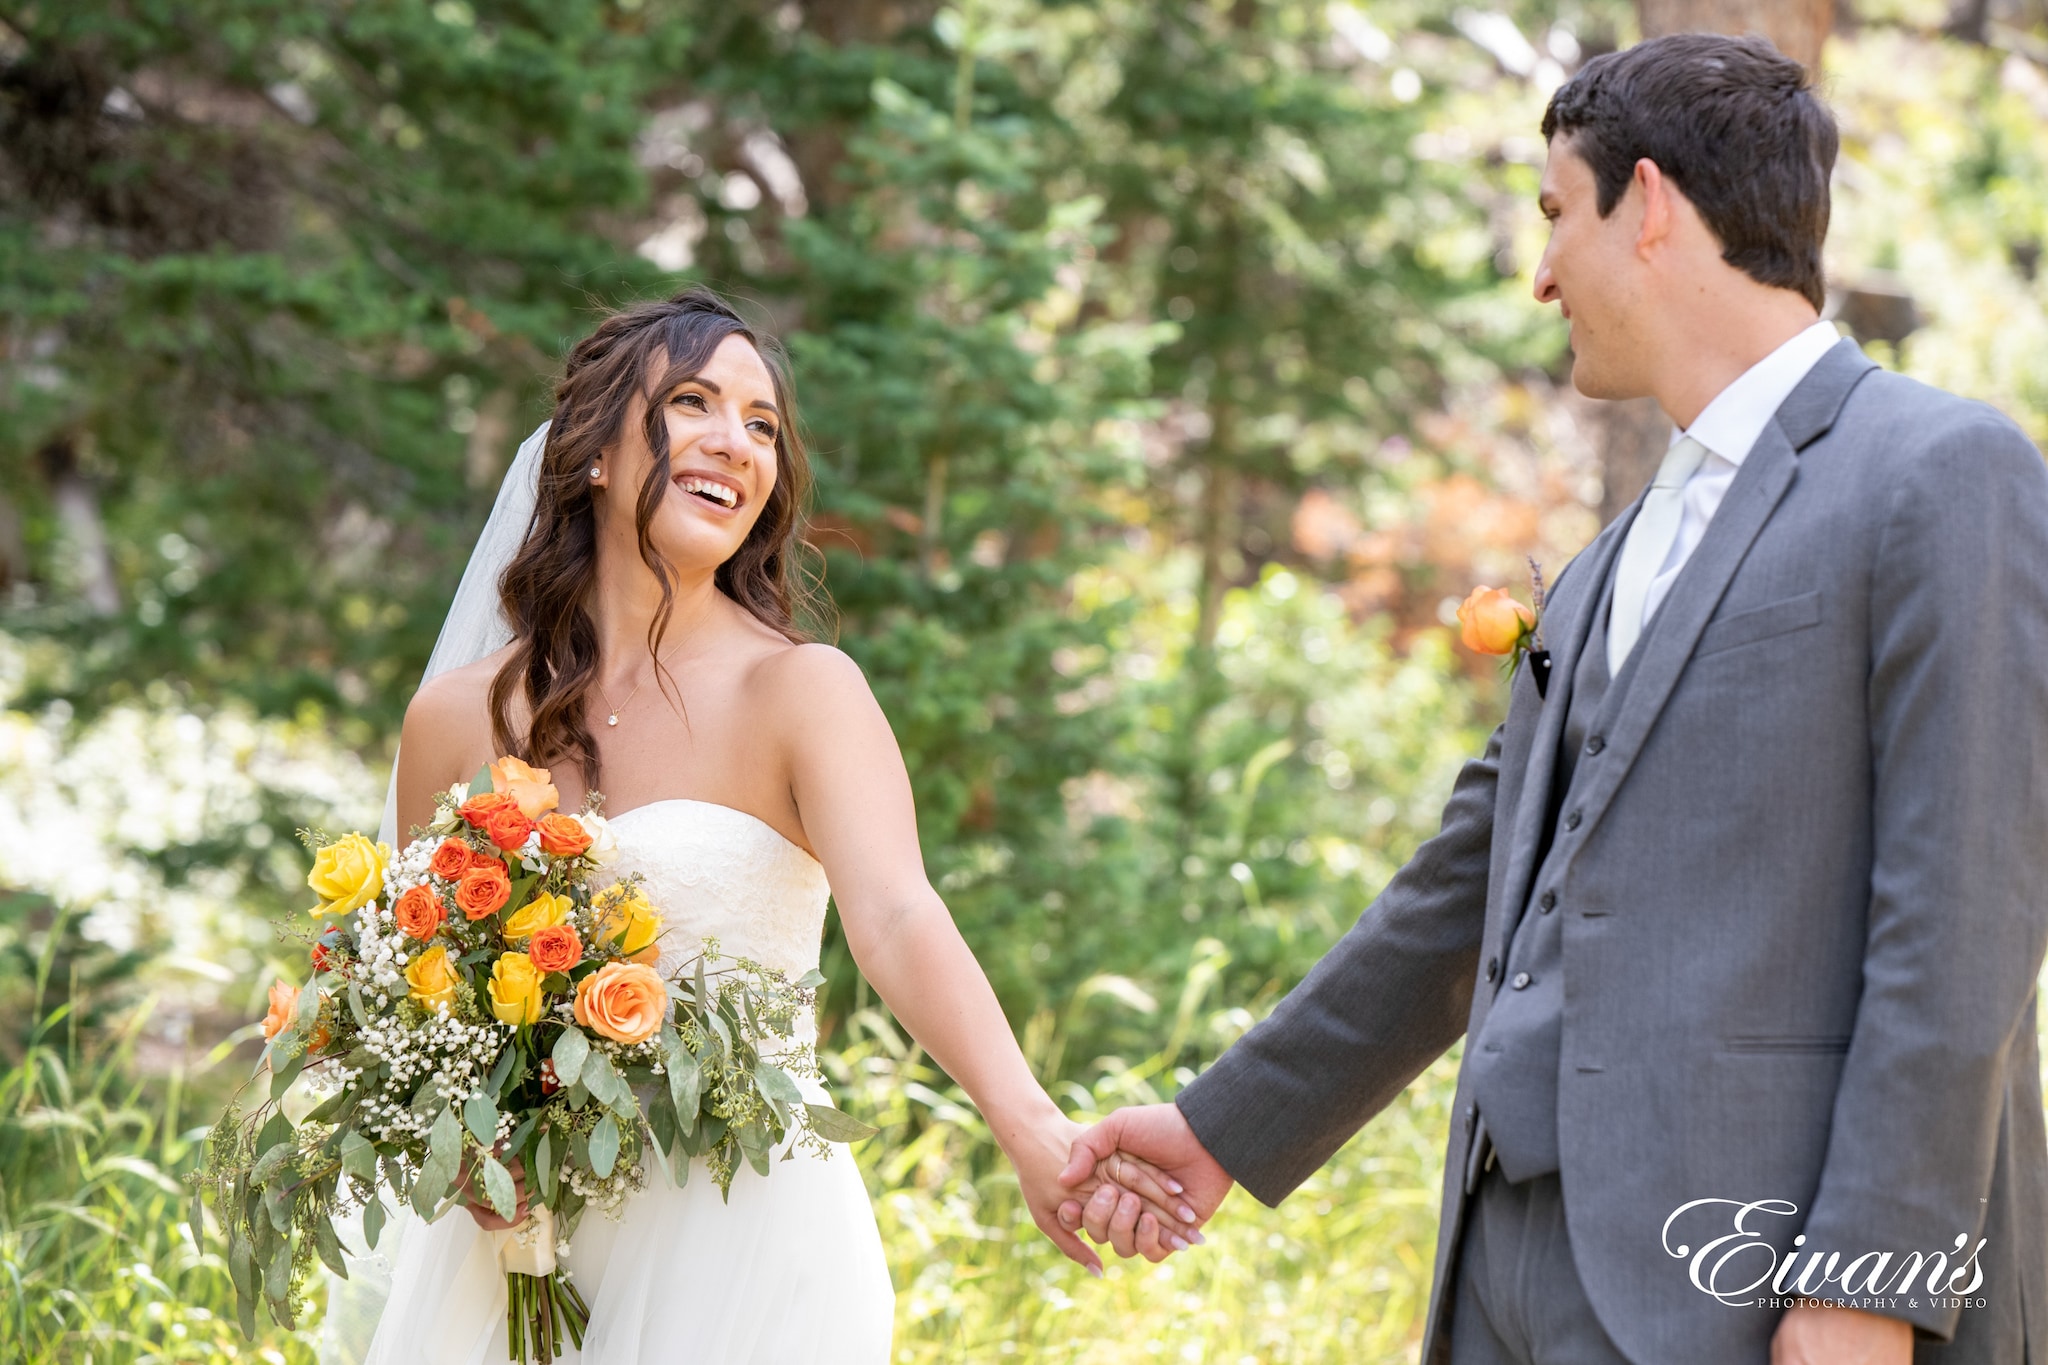 How Long Does It Take to Get Your Wedding Photos Back?